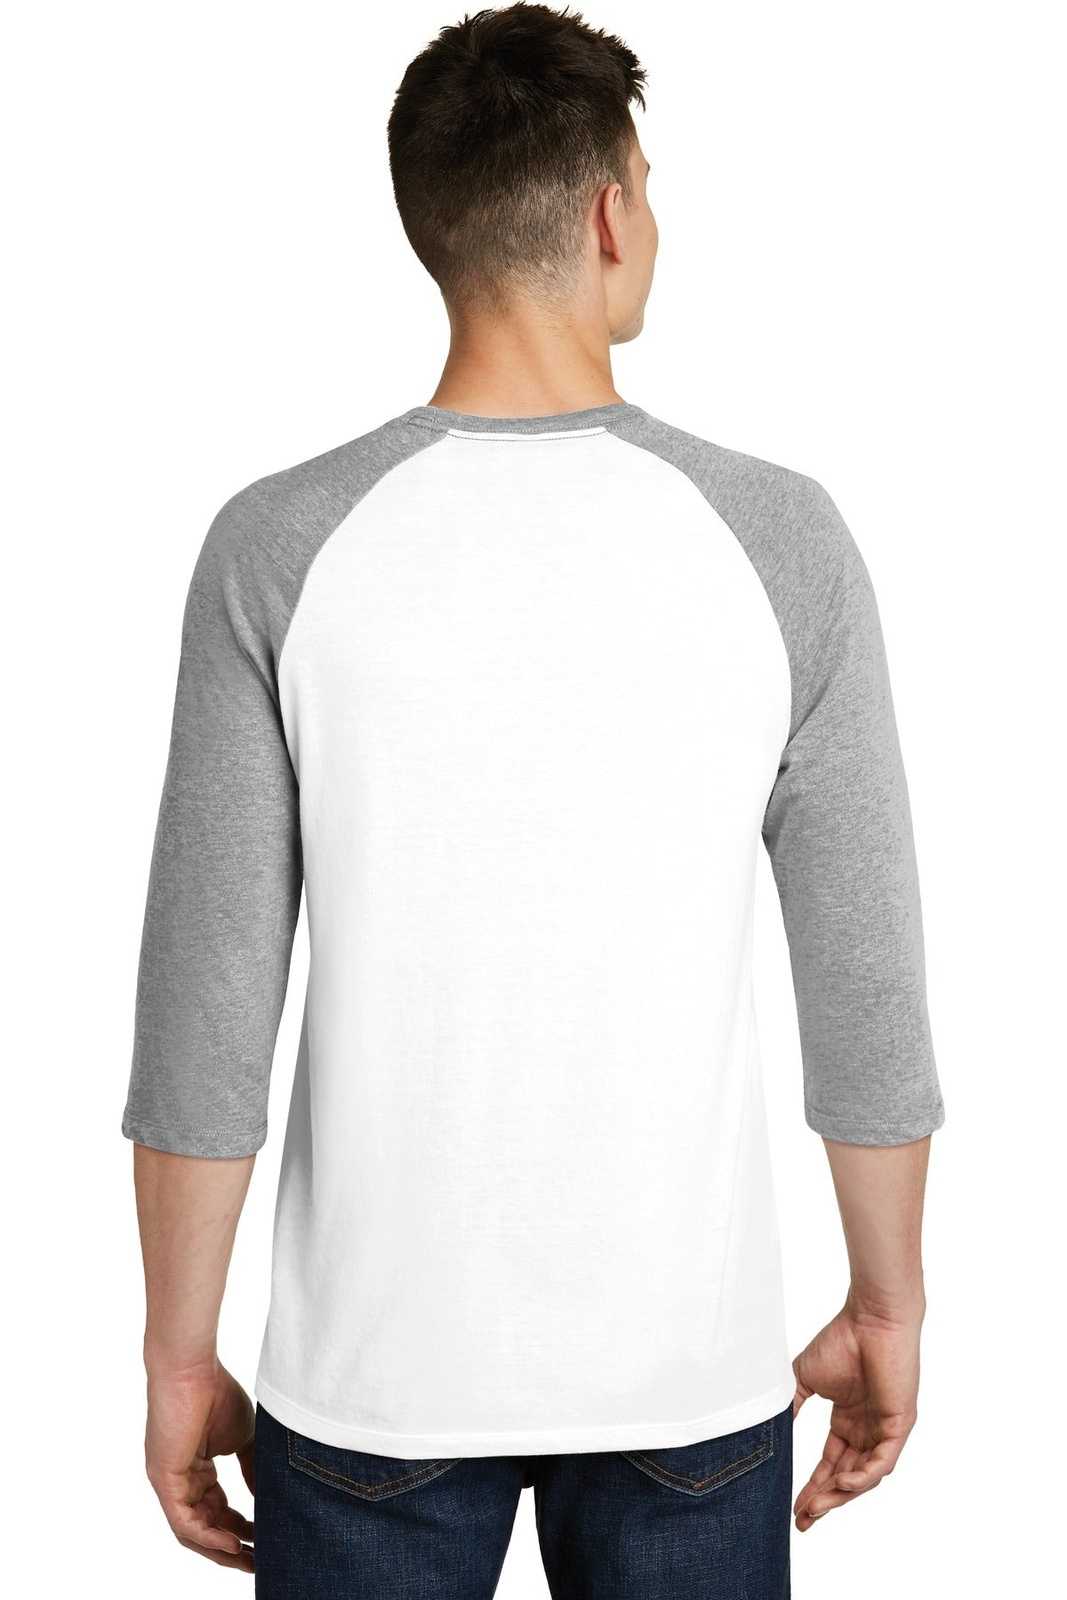 District DT6210 Very Important Tee 3/4-Sleeve Raglan - Light Heather Gray White - HIT a Double - 2